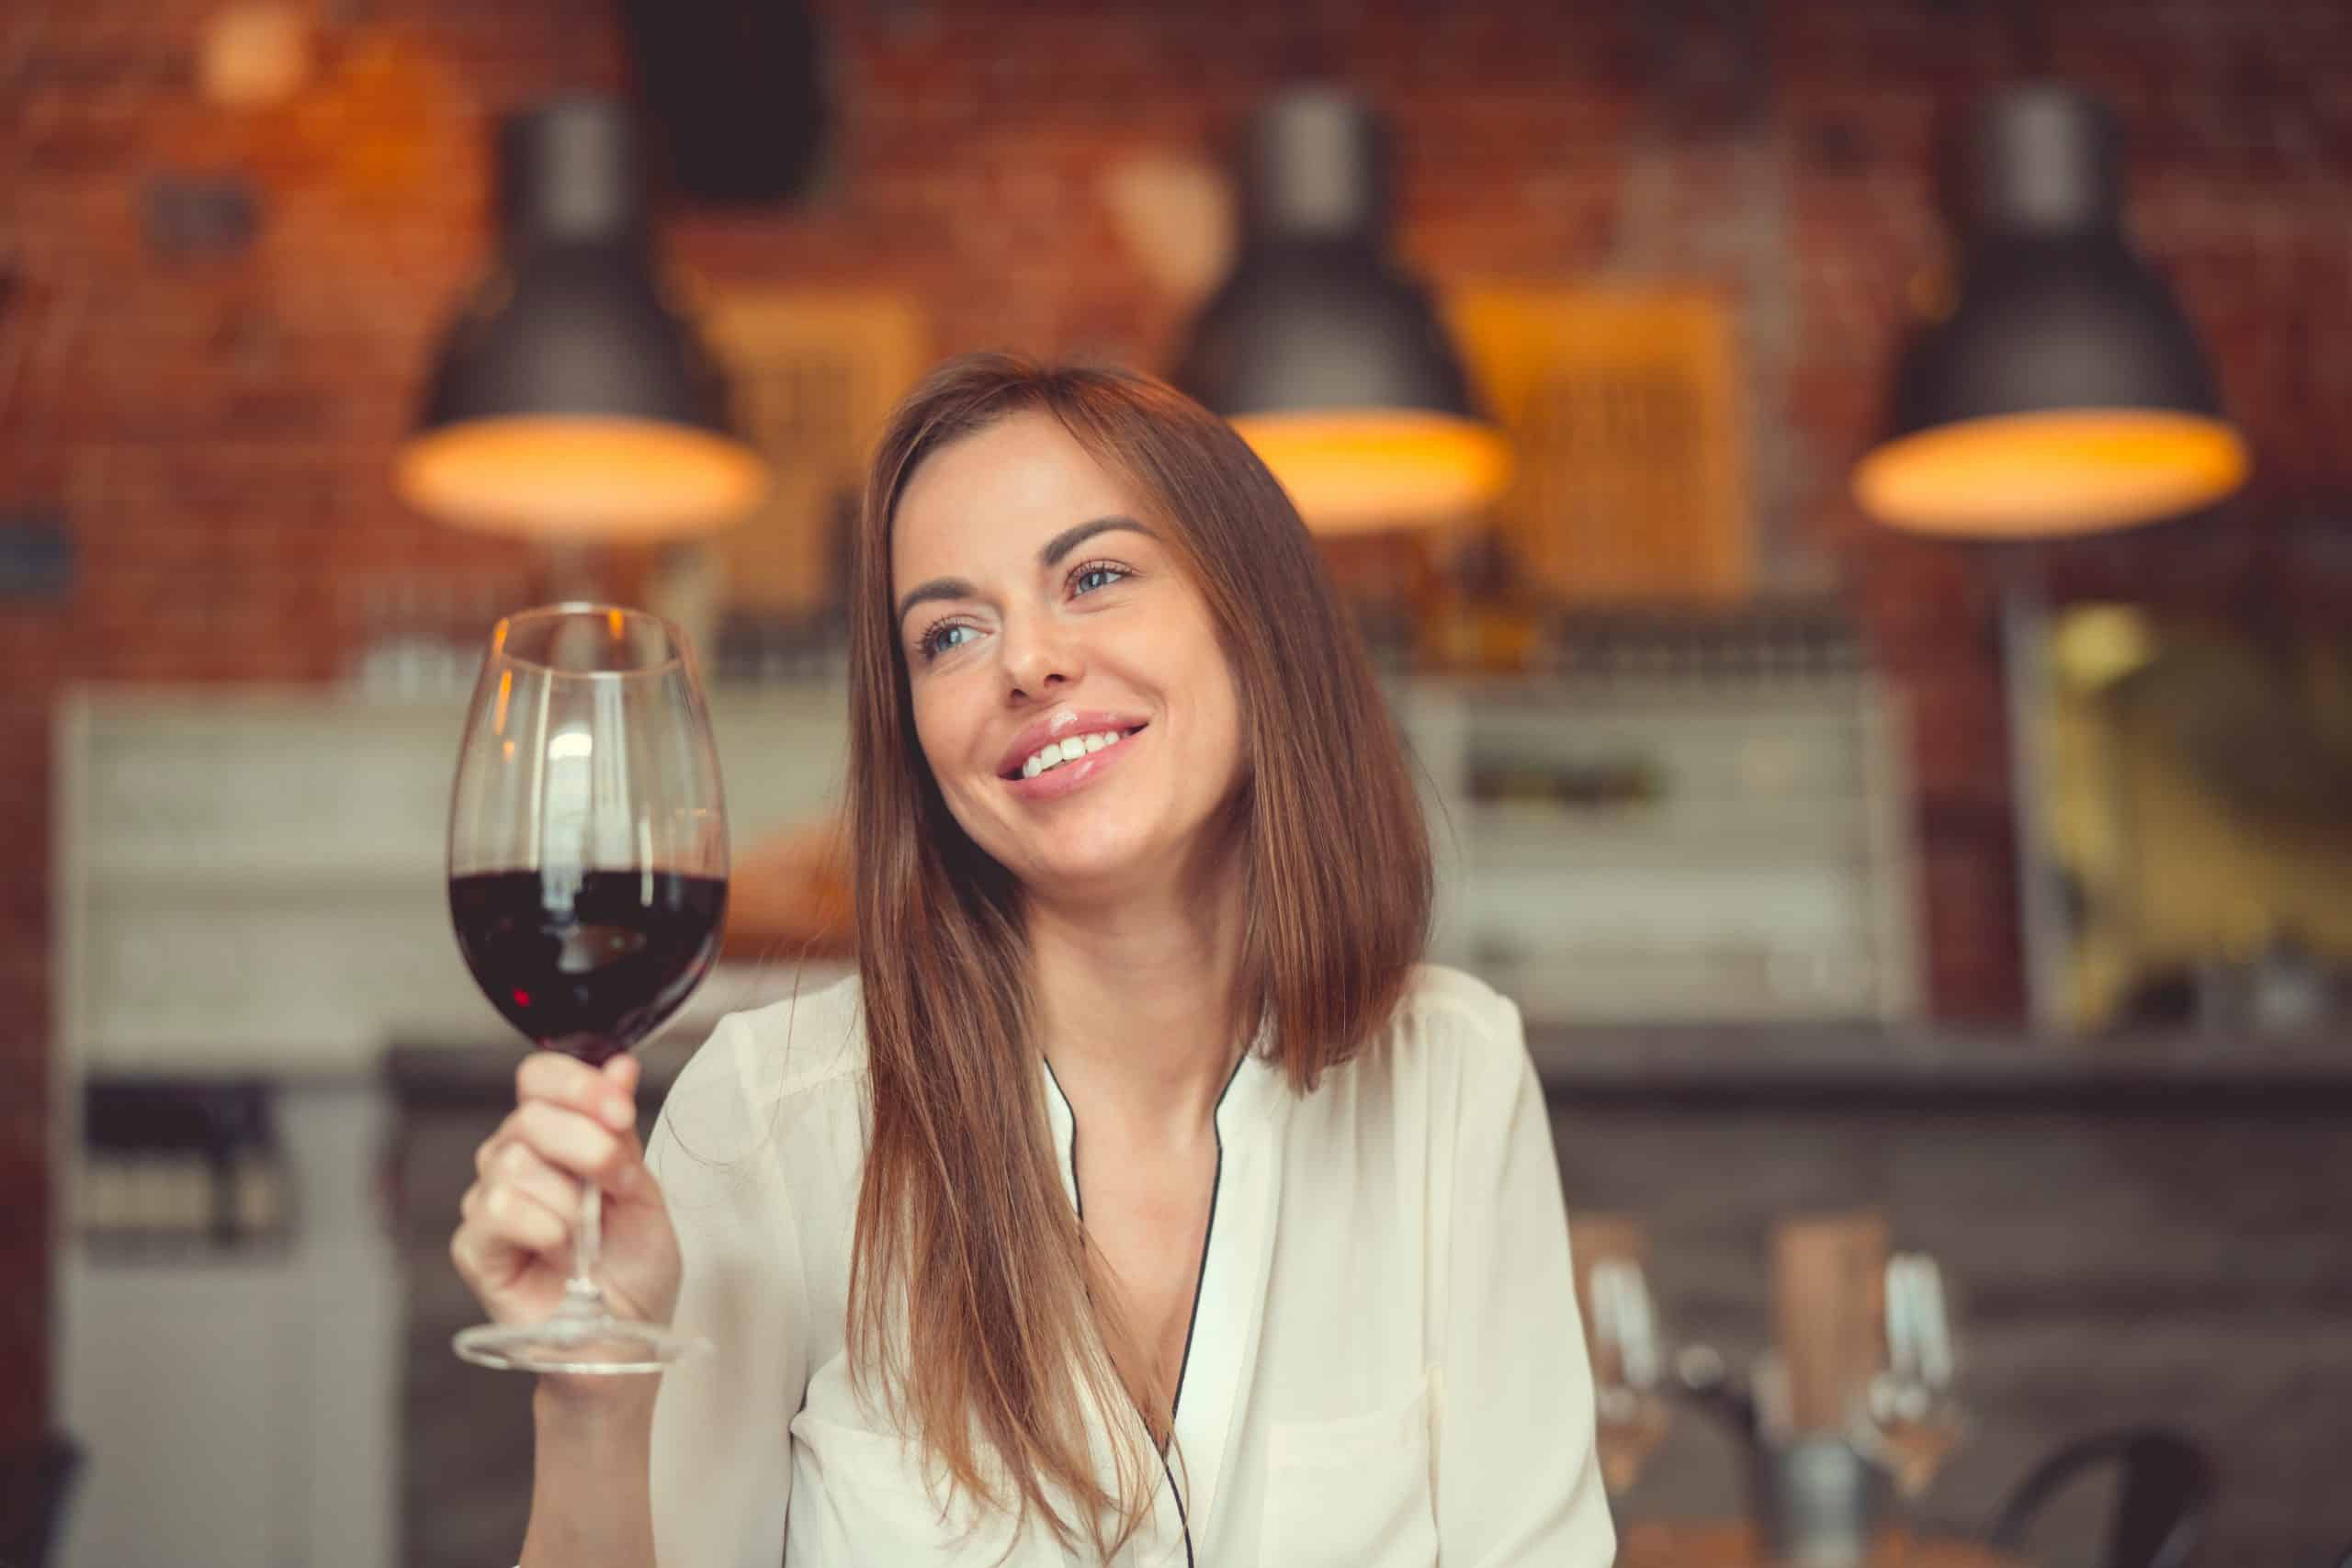 Smiling girl with a glass of red wine in a restaurant